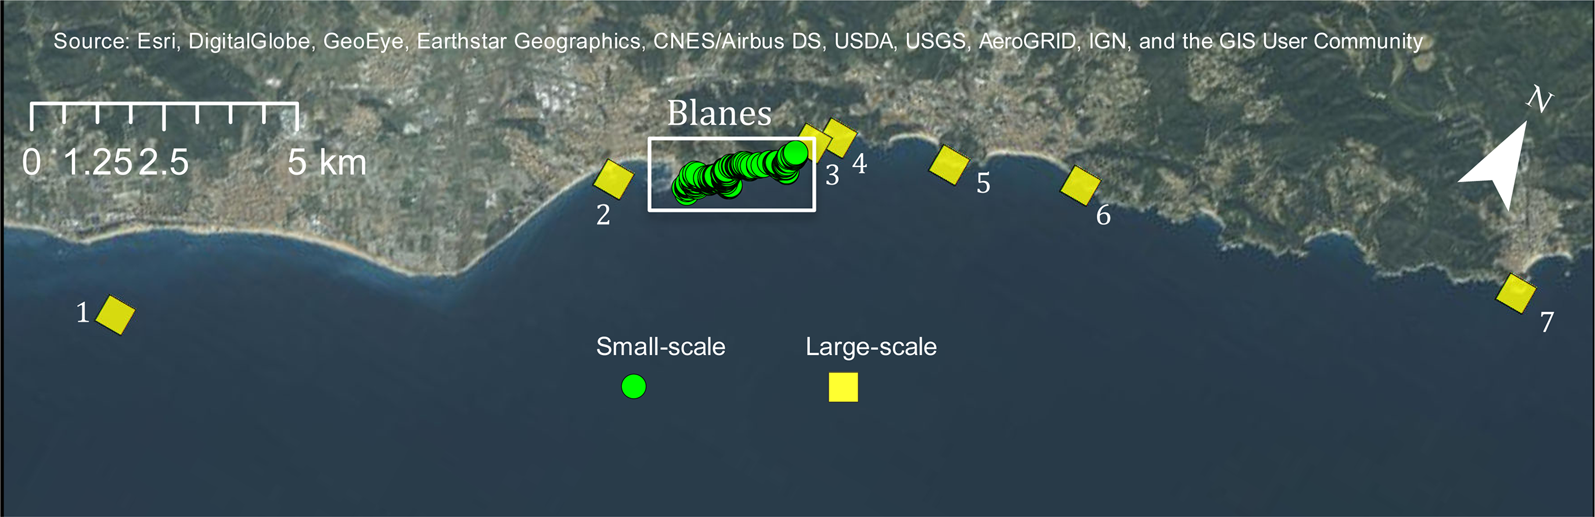 A novel integrative approach elucidates fine-scale dispersal patchiness in  marine populations